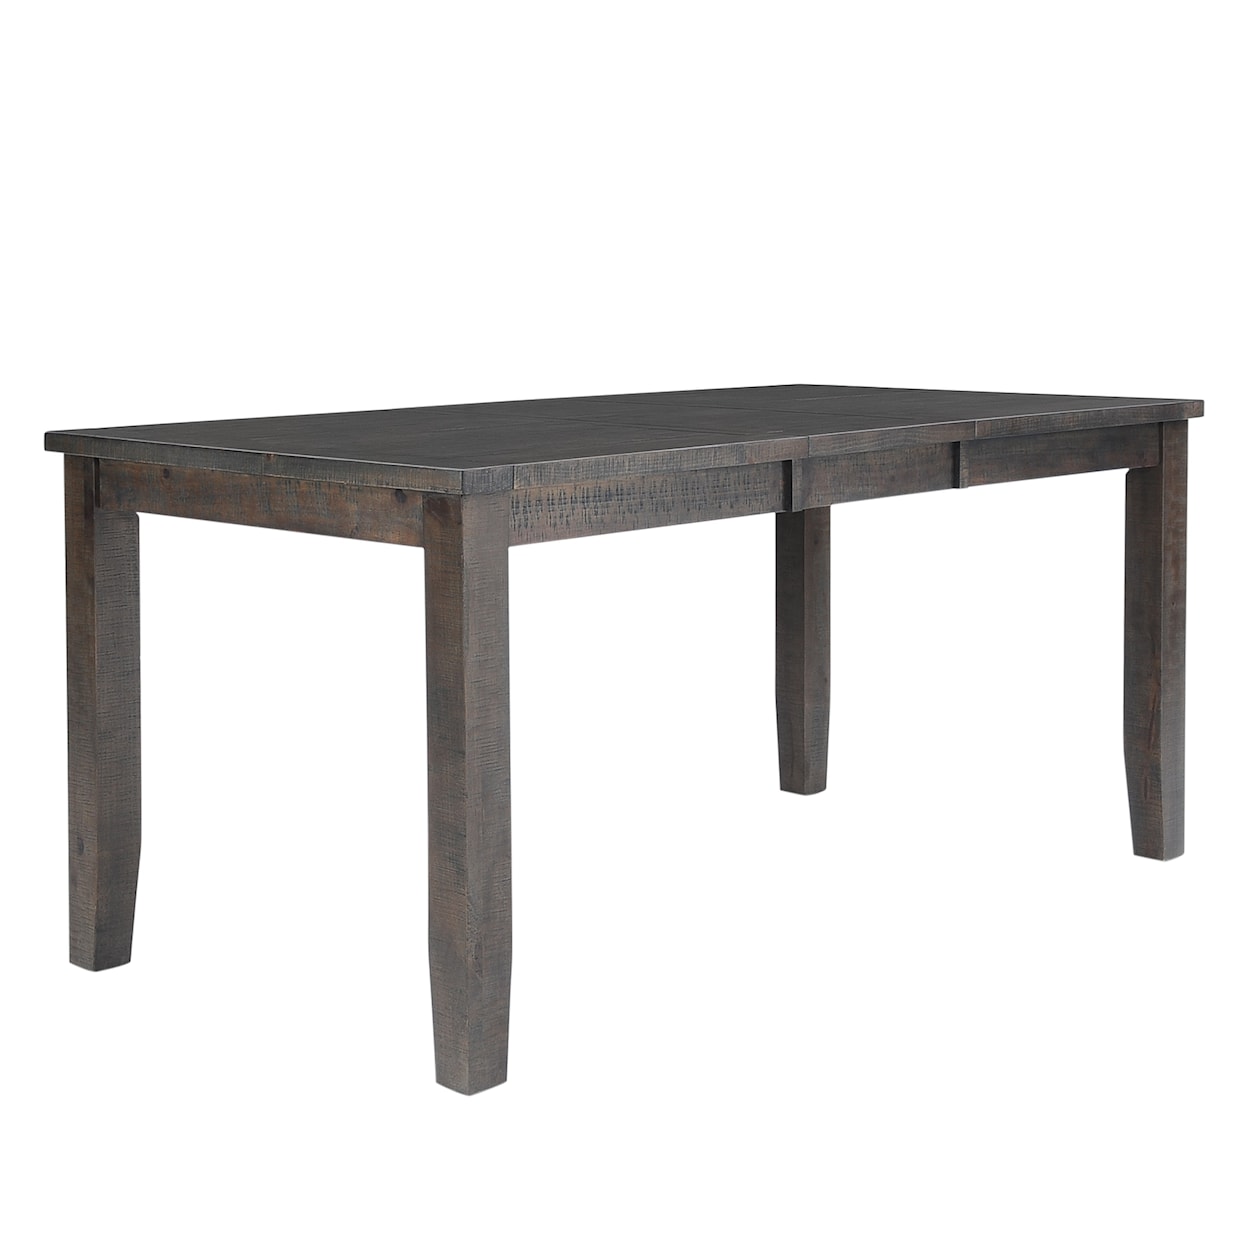 VFM Signature Willow Creek Ext Counter Height Table